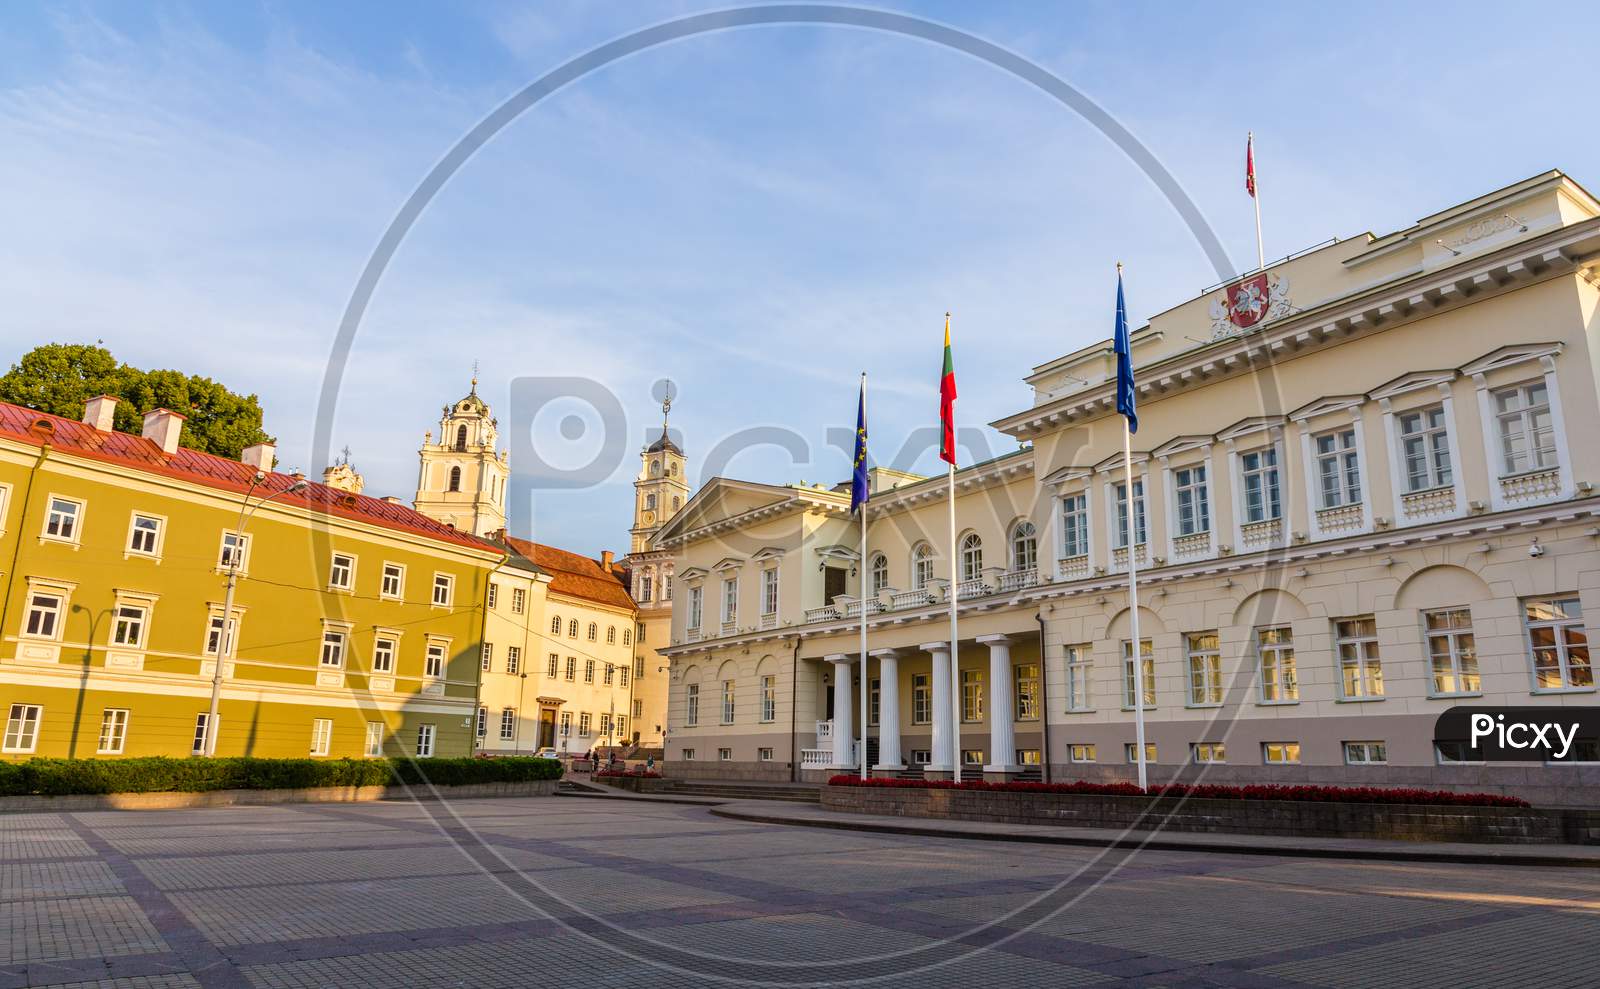 Representative Yard And Presidential Palace In Vilnius, Lithuani